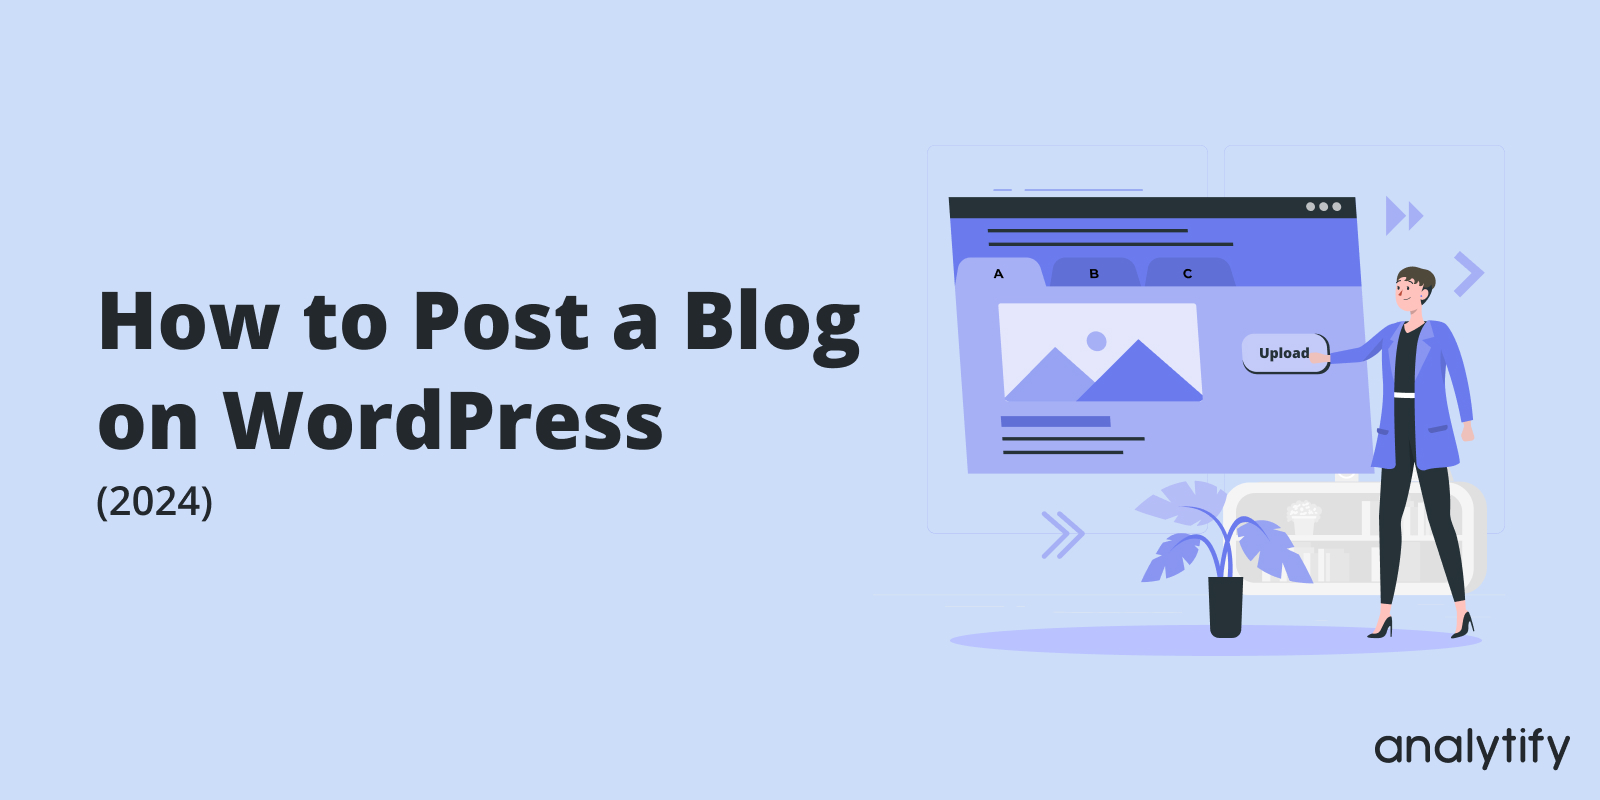 How to post a blog on WordPress